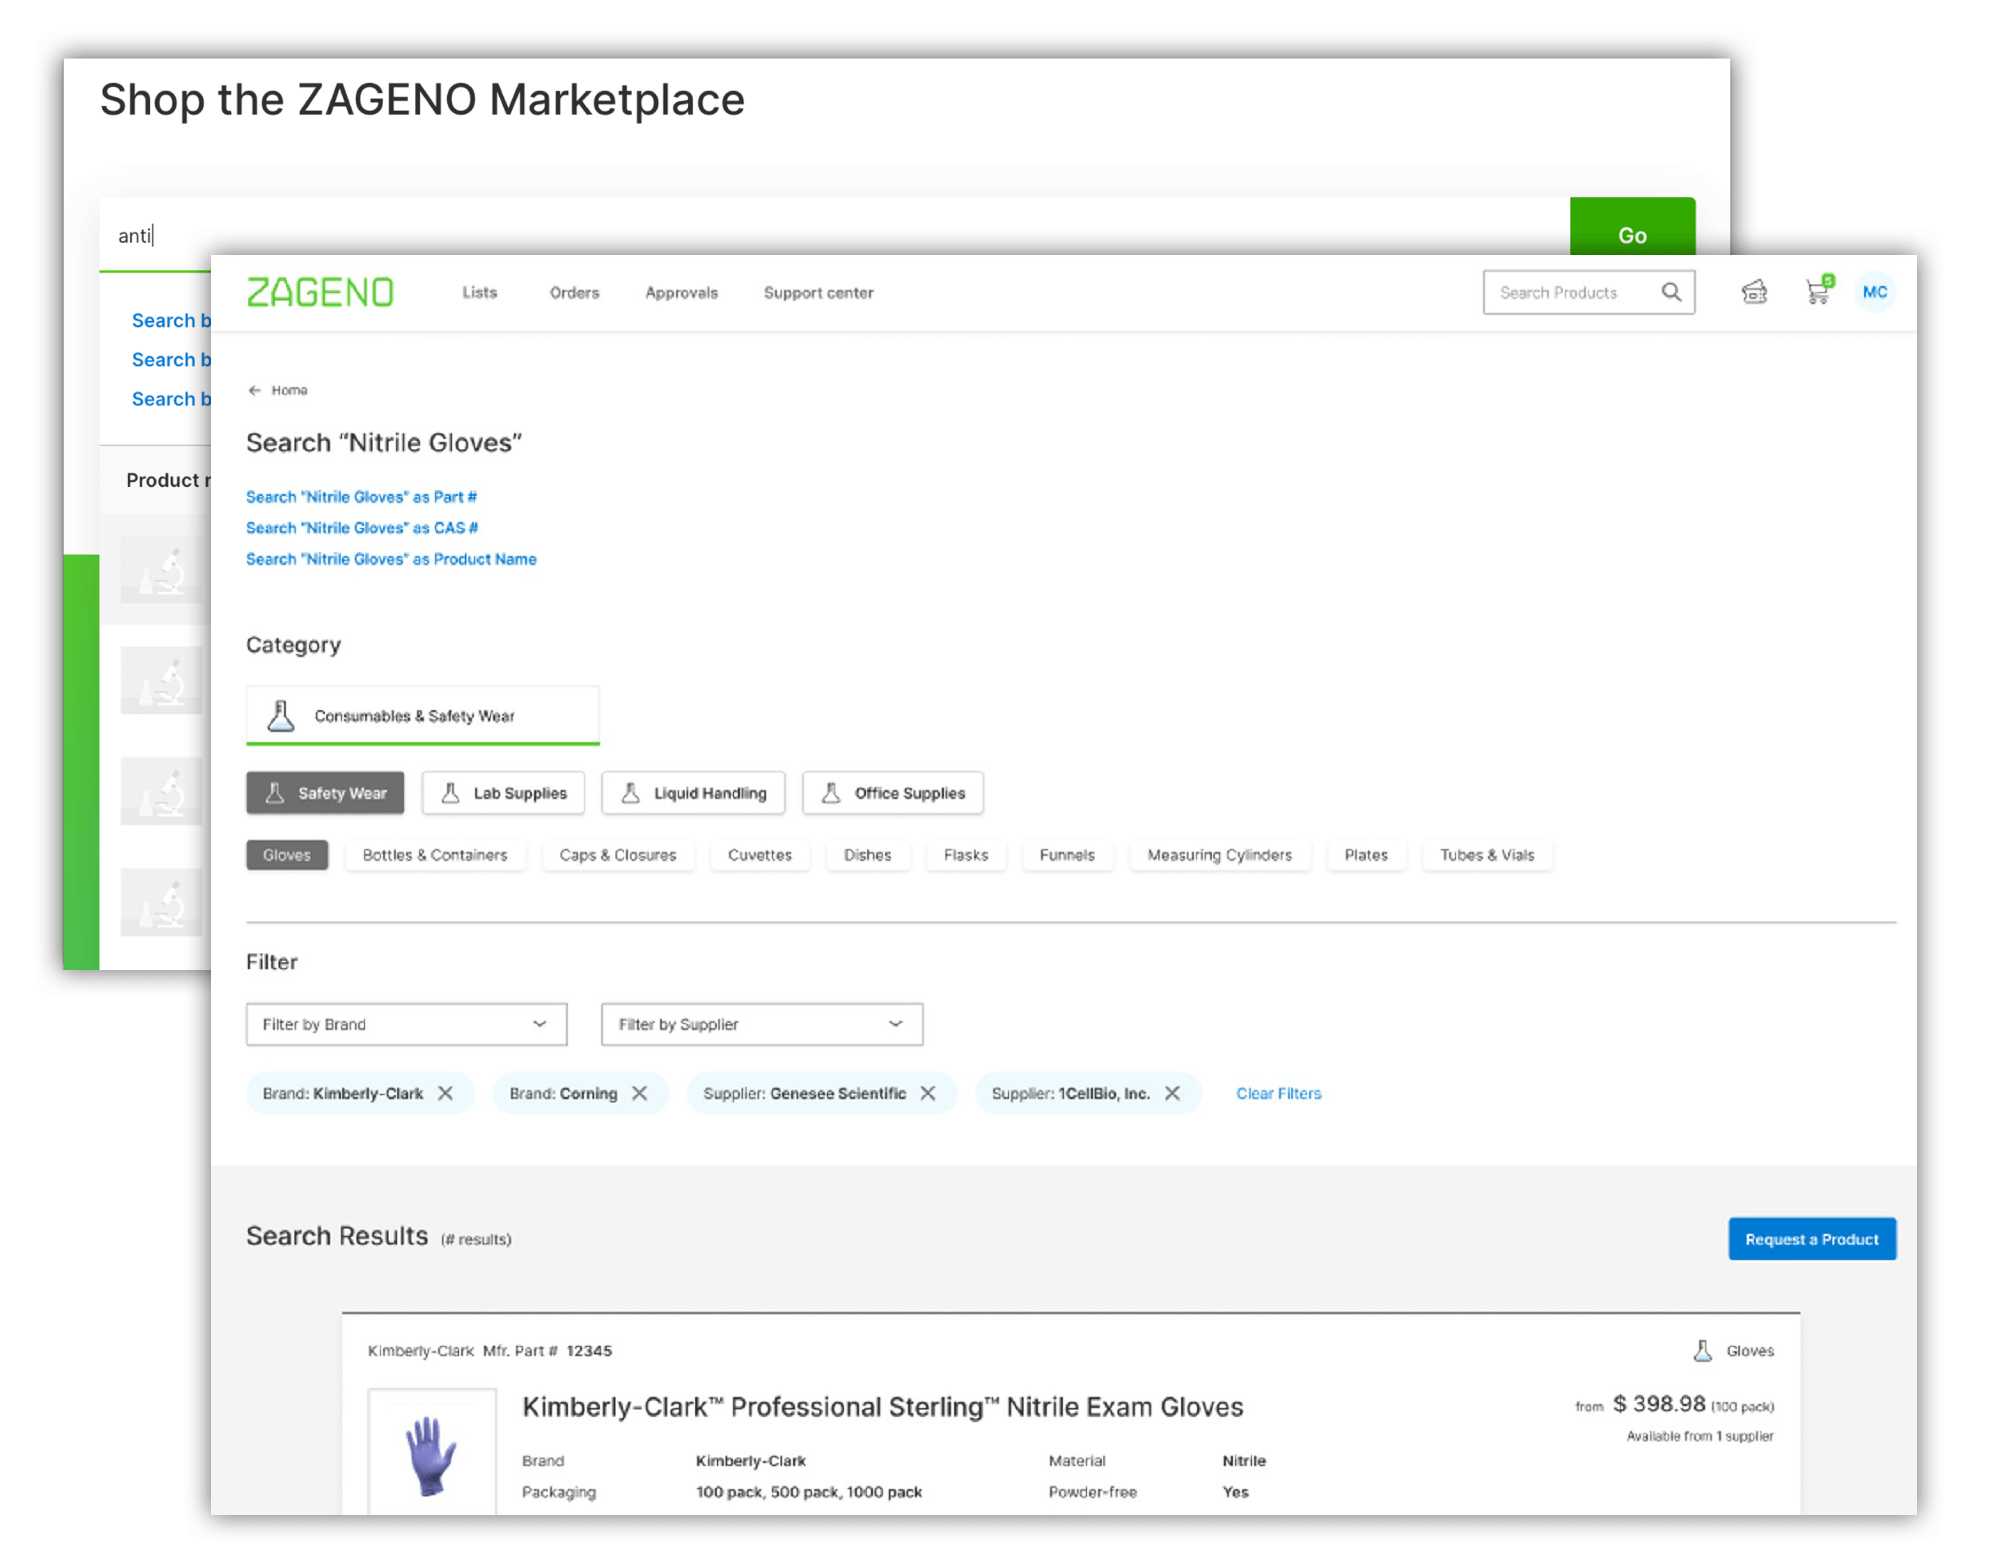 Screenshot of ZAGENO Marketplace features